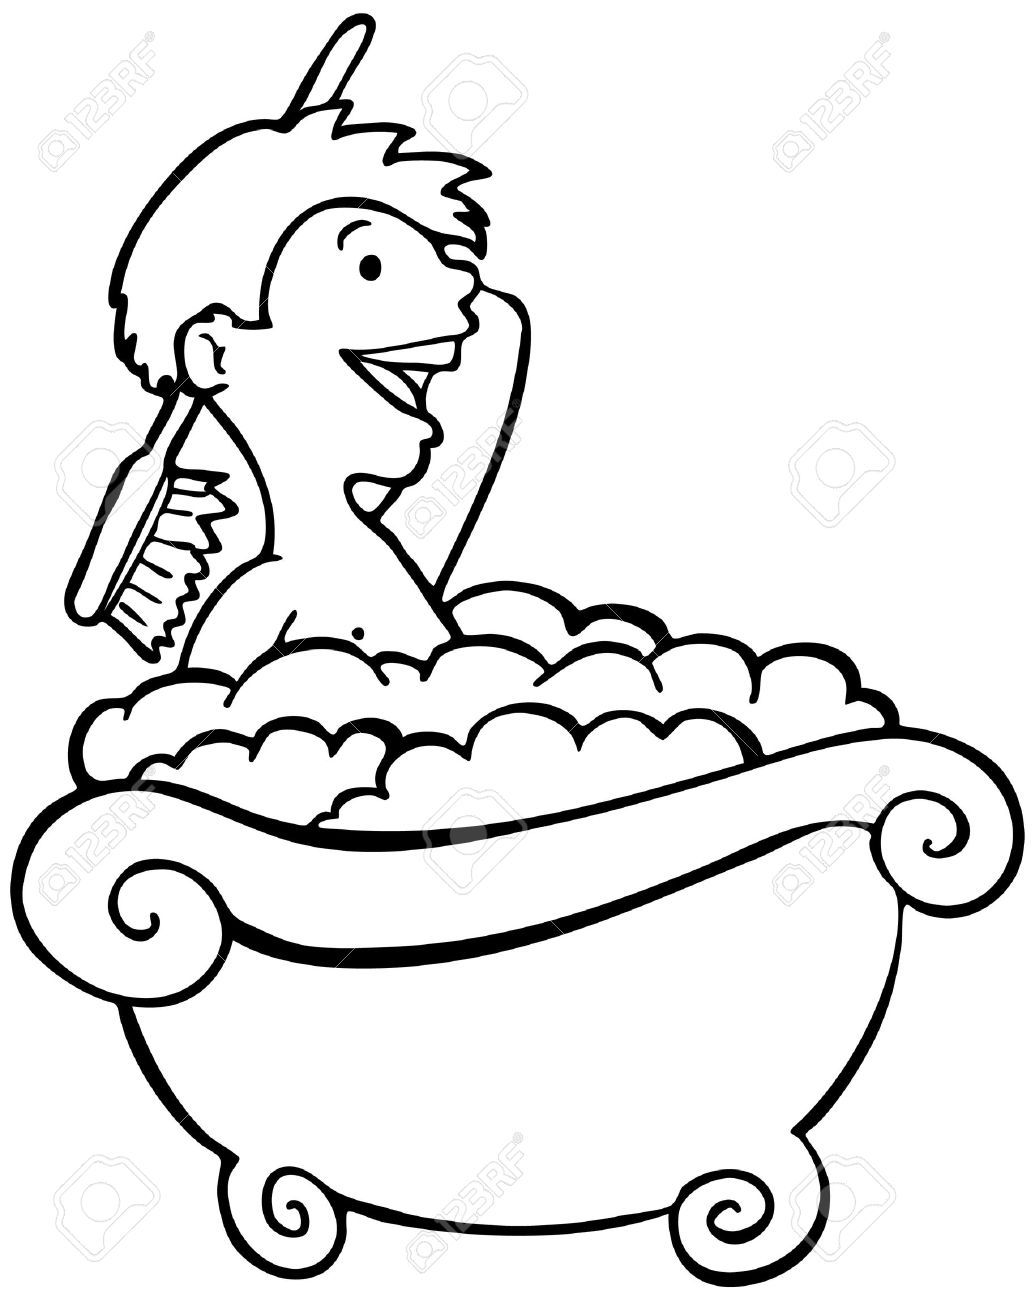 Bath clipart black and white 7 » Clipart Station.